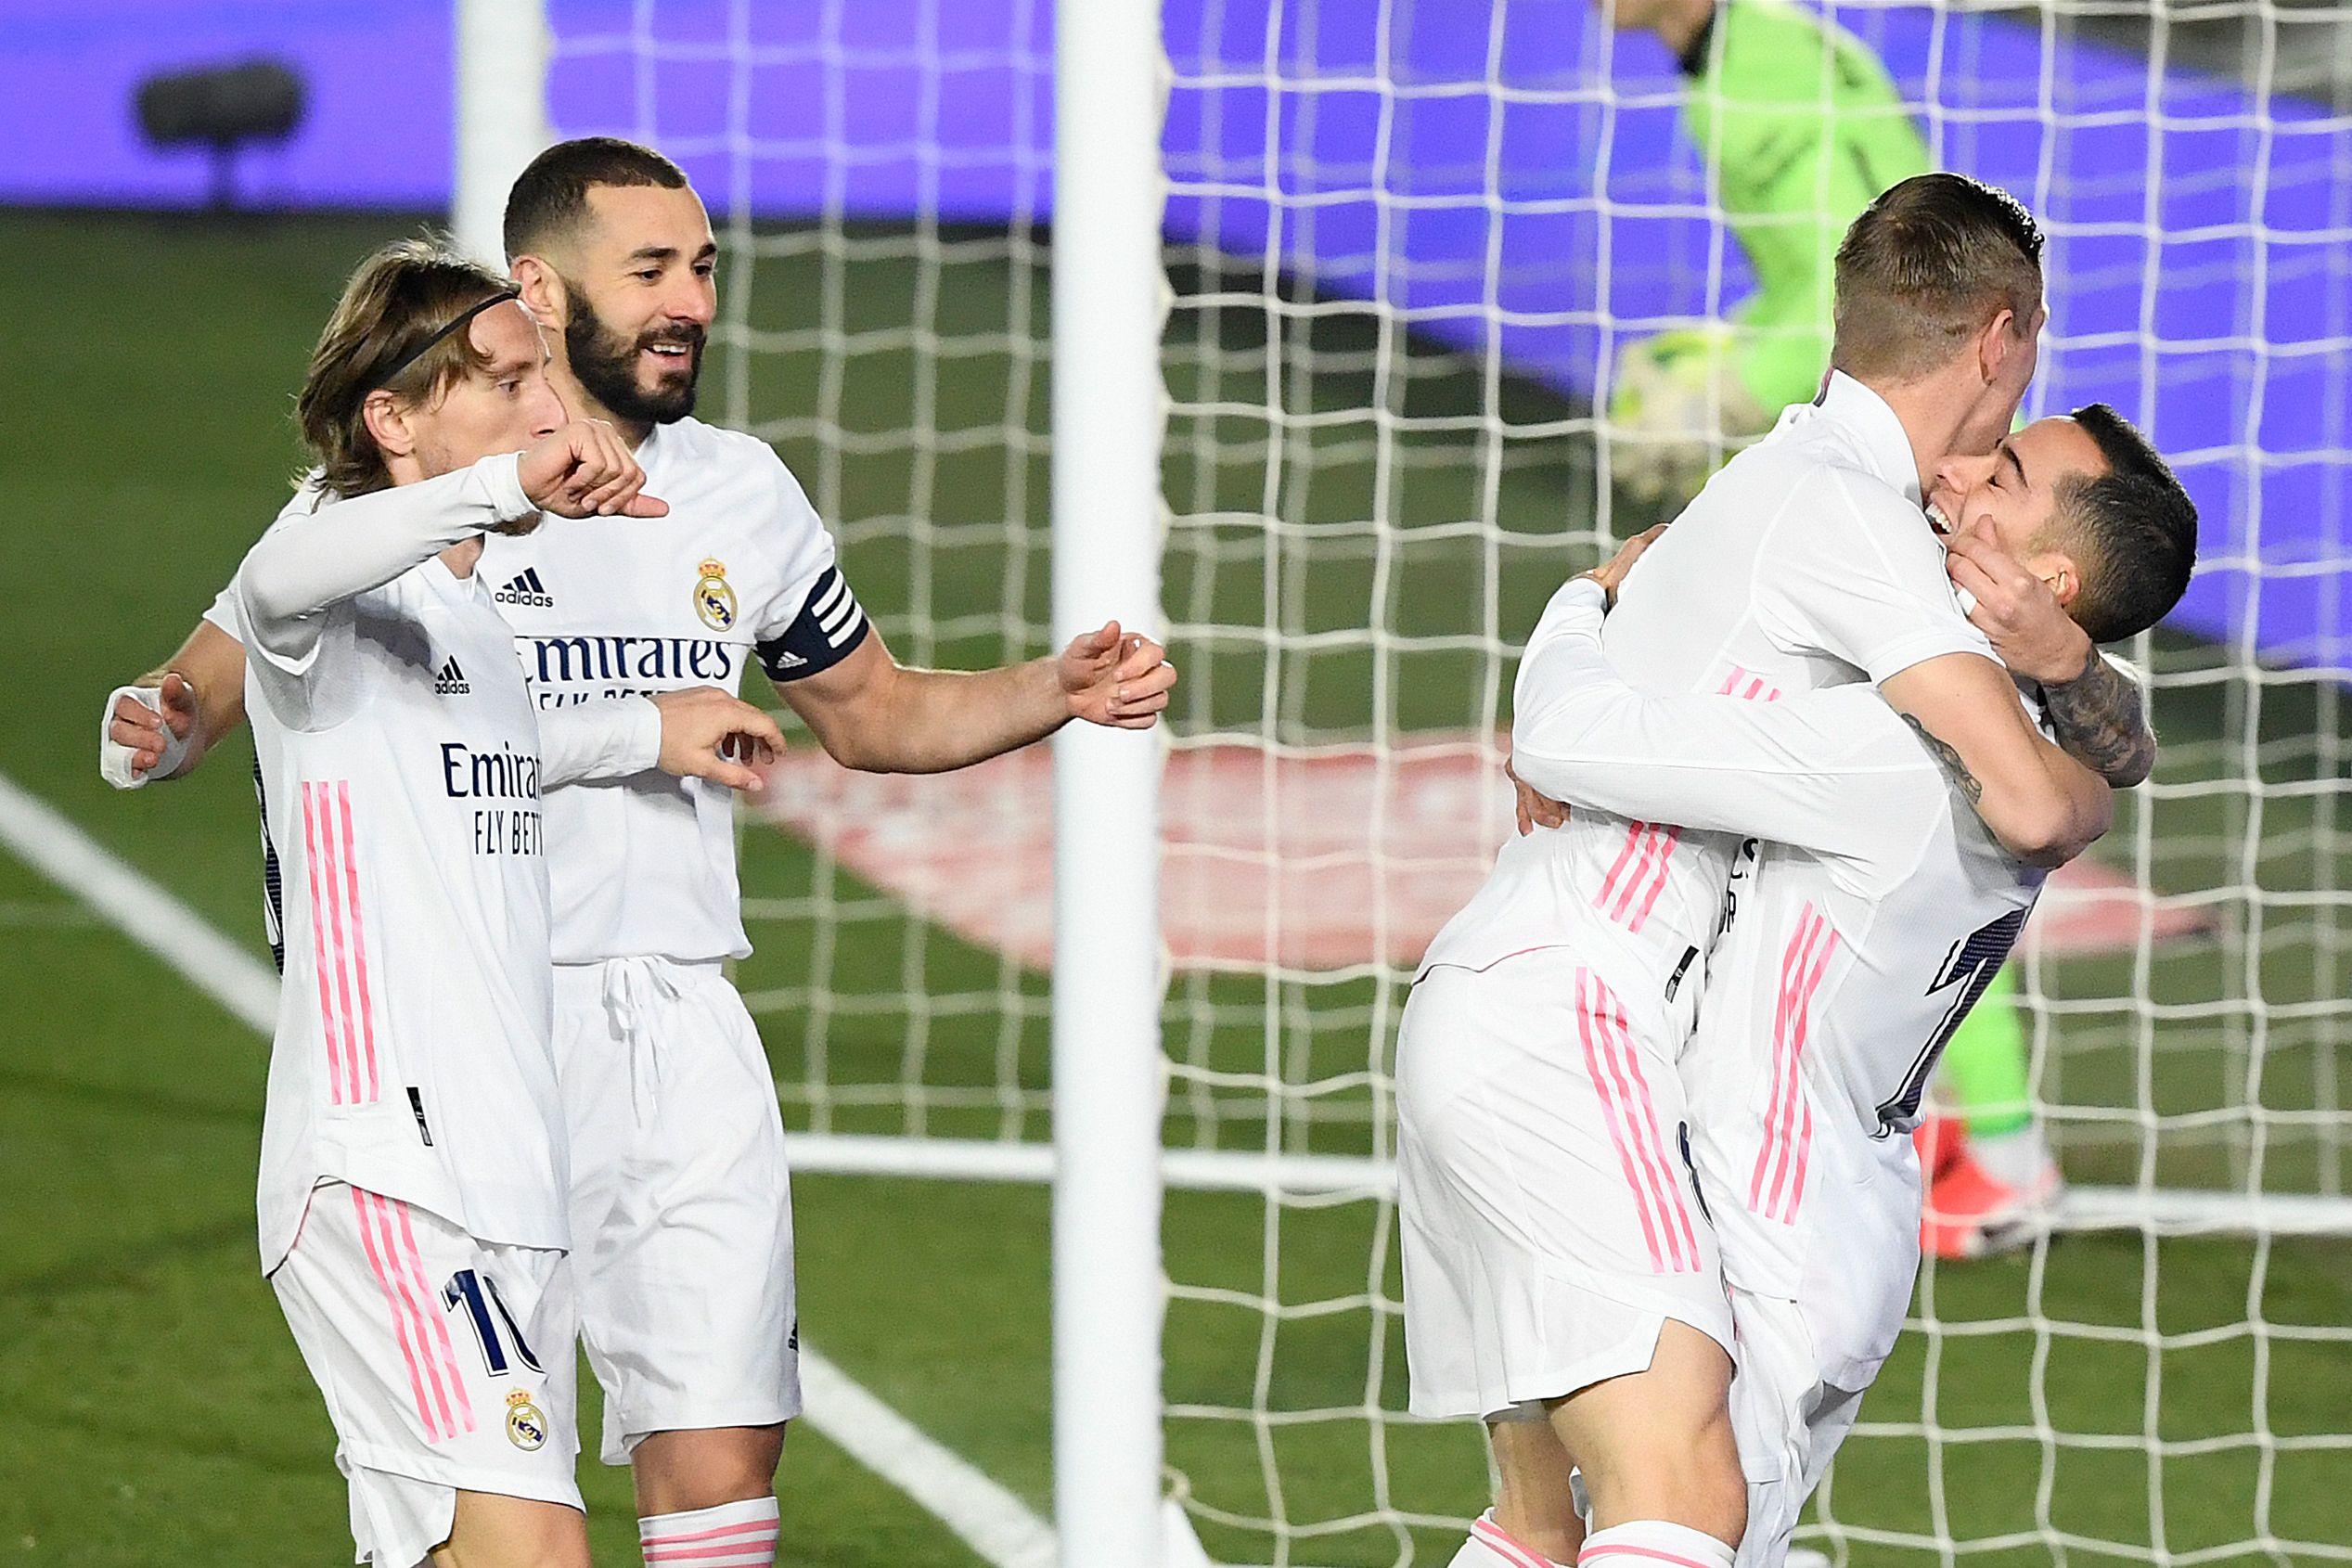 Real Madrid's Spanish forward Lucas Vazquez (R) celebrates with teammates after scoring a goal during the Spanish League football match between Real Madrid and Celta Vigo at the Alfredo Di Stefano stadium in Valdebebas, northeast of Madrid, on January 2, 2021. (Photo by OSCAR DEL POZO / AFP) (Photo by OSCAR DEL POZO/AFP via Getty Images)